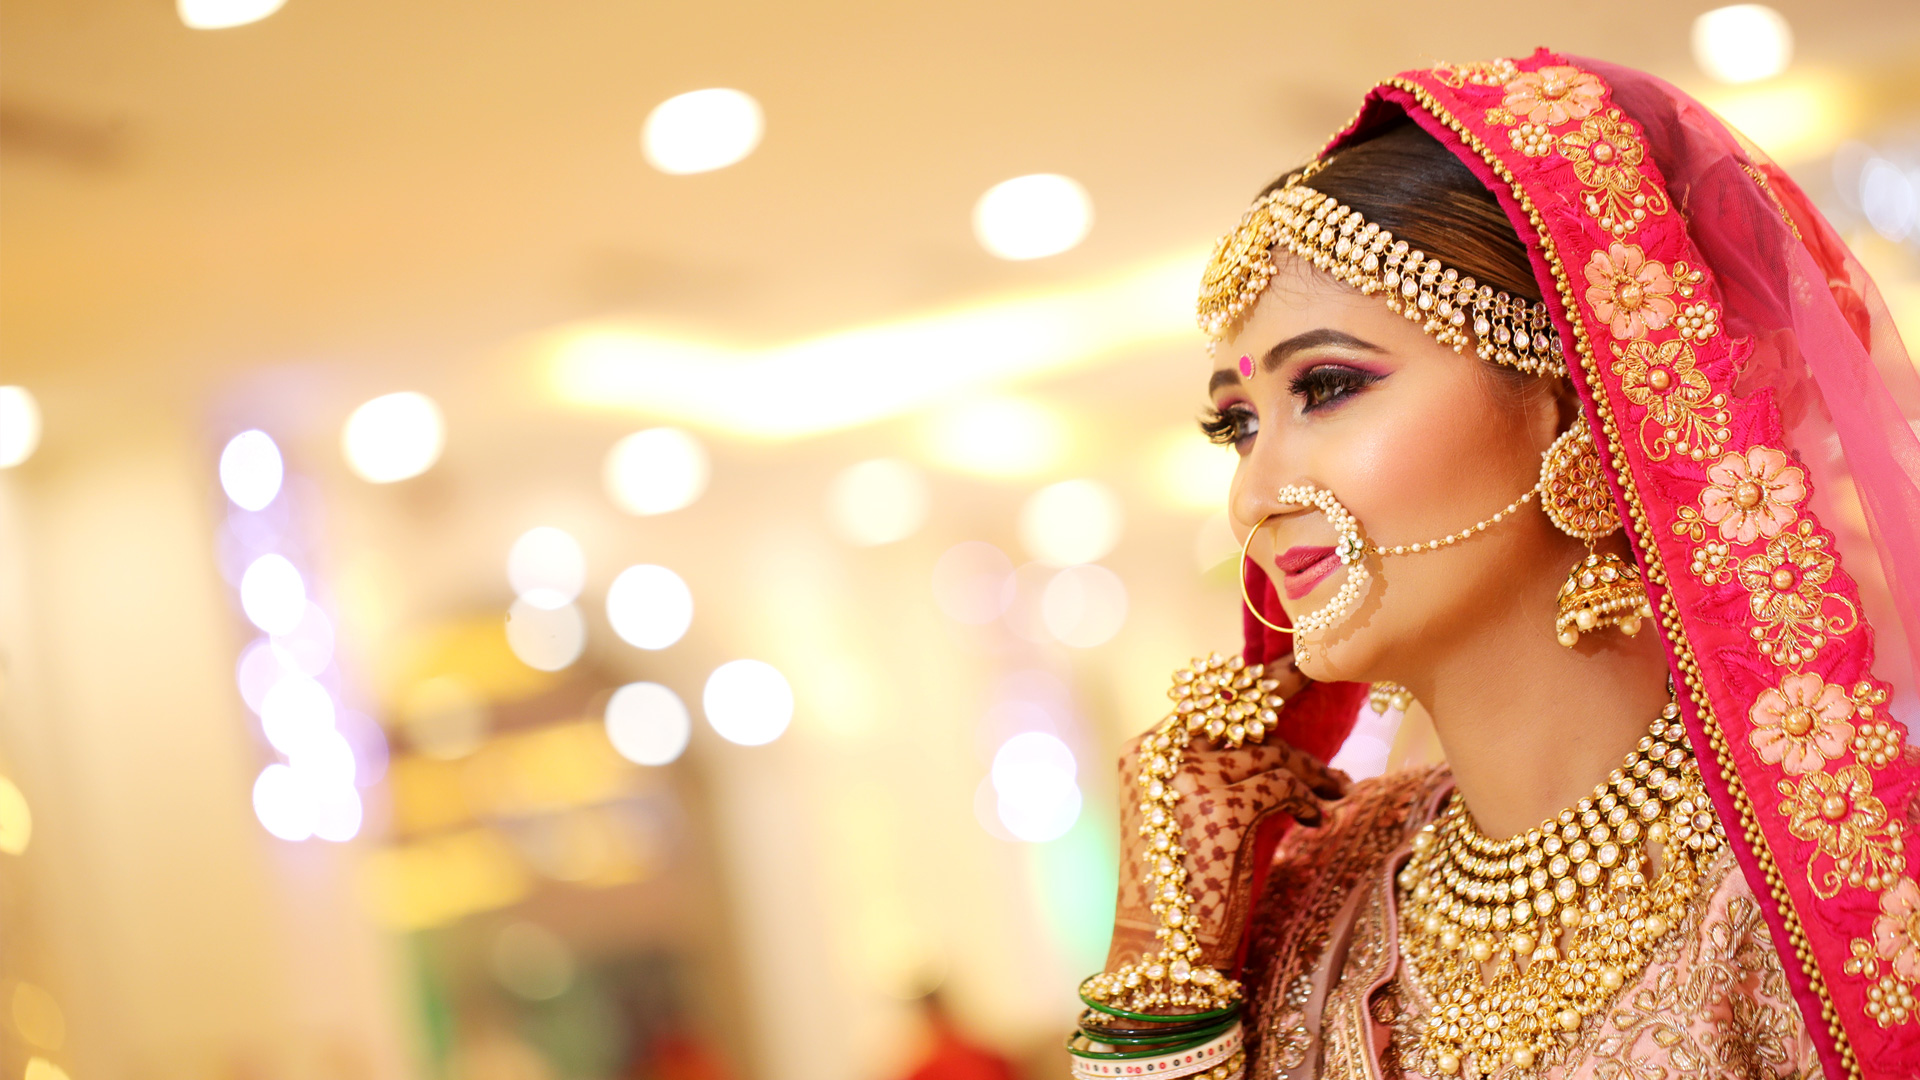 Wedding Photographer videographer  in Gurgaon, Wedding Photographer videographer in Delhi,  best Post Wedding Photography, SVS Creations offers,  svs, svs creations